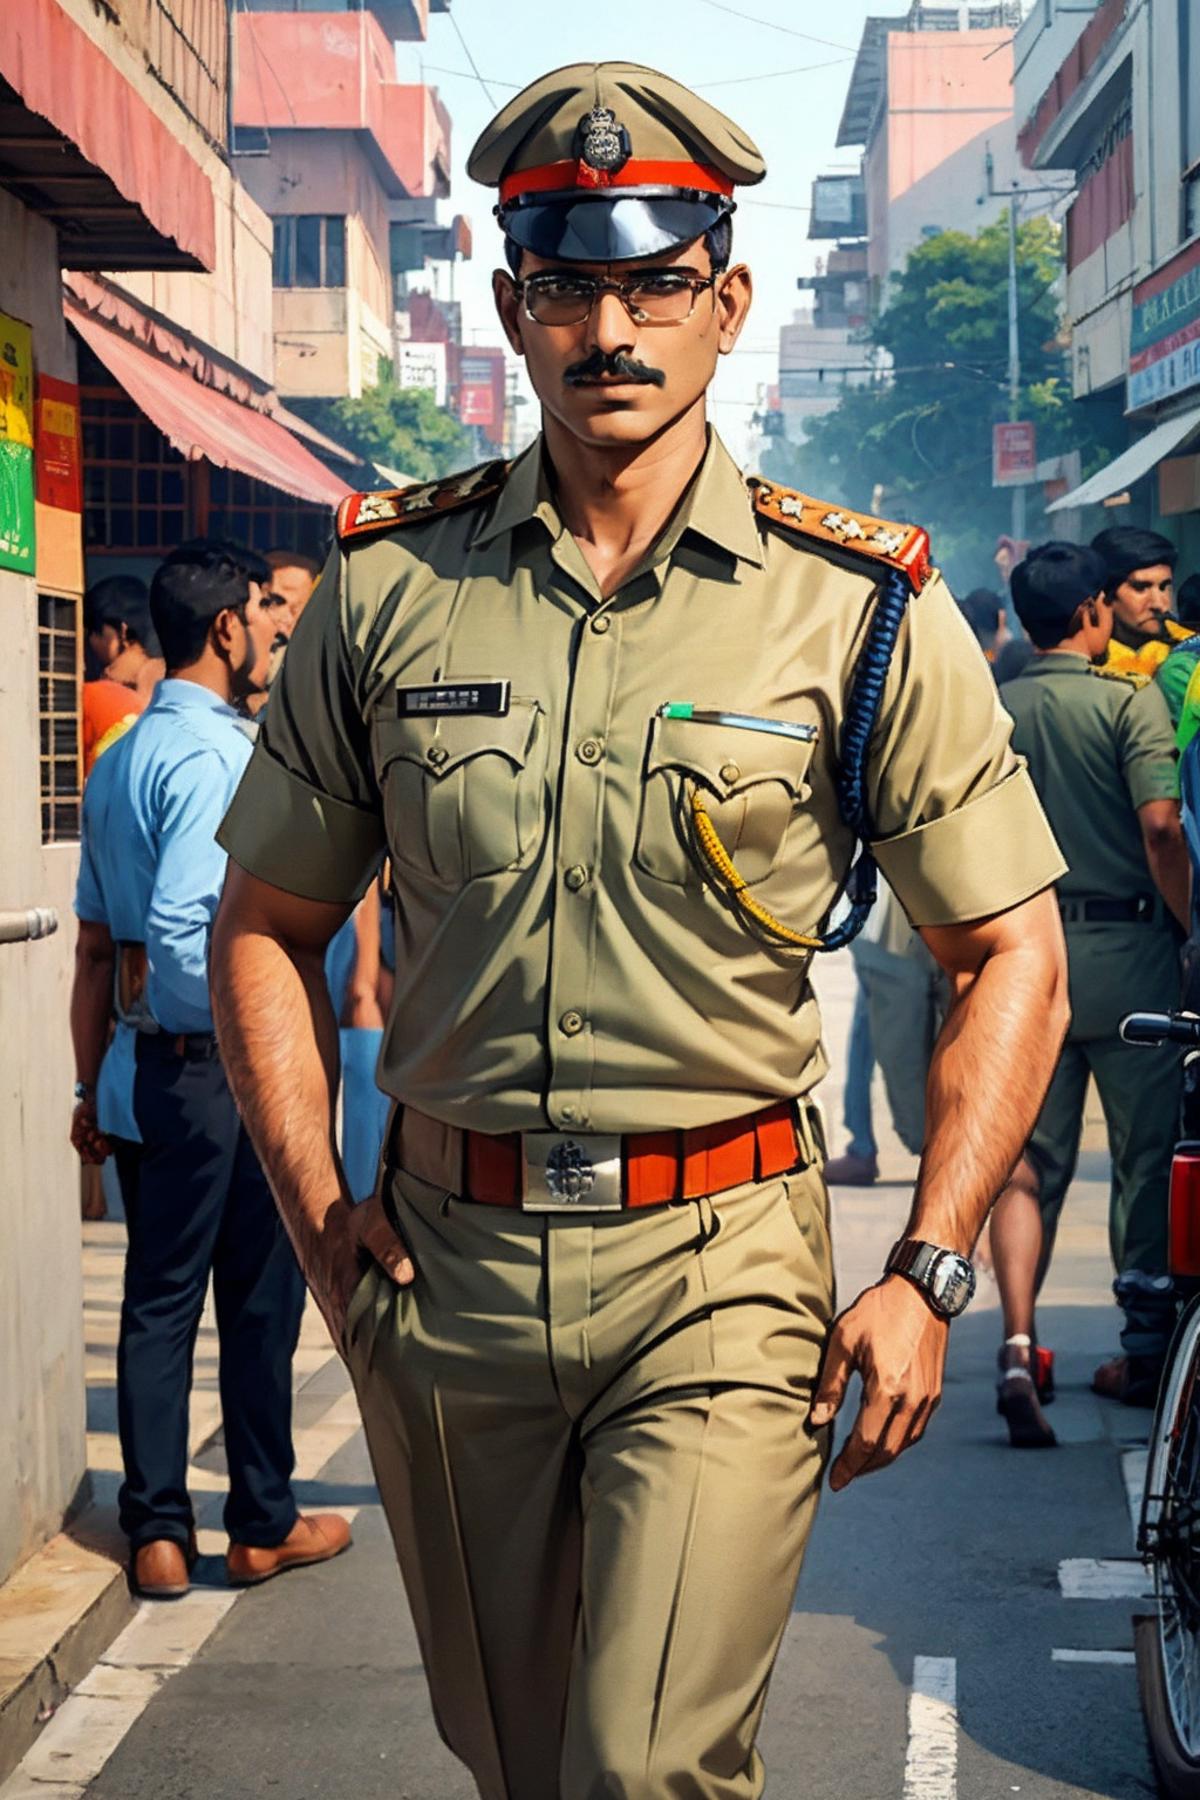 Indian Police Uniform image by Dreamer247